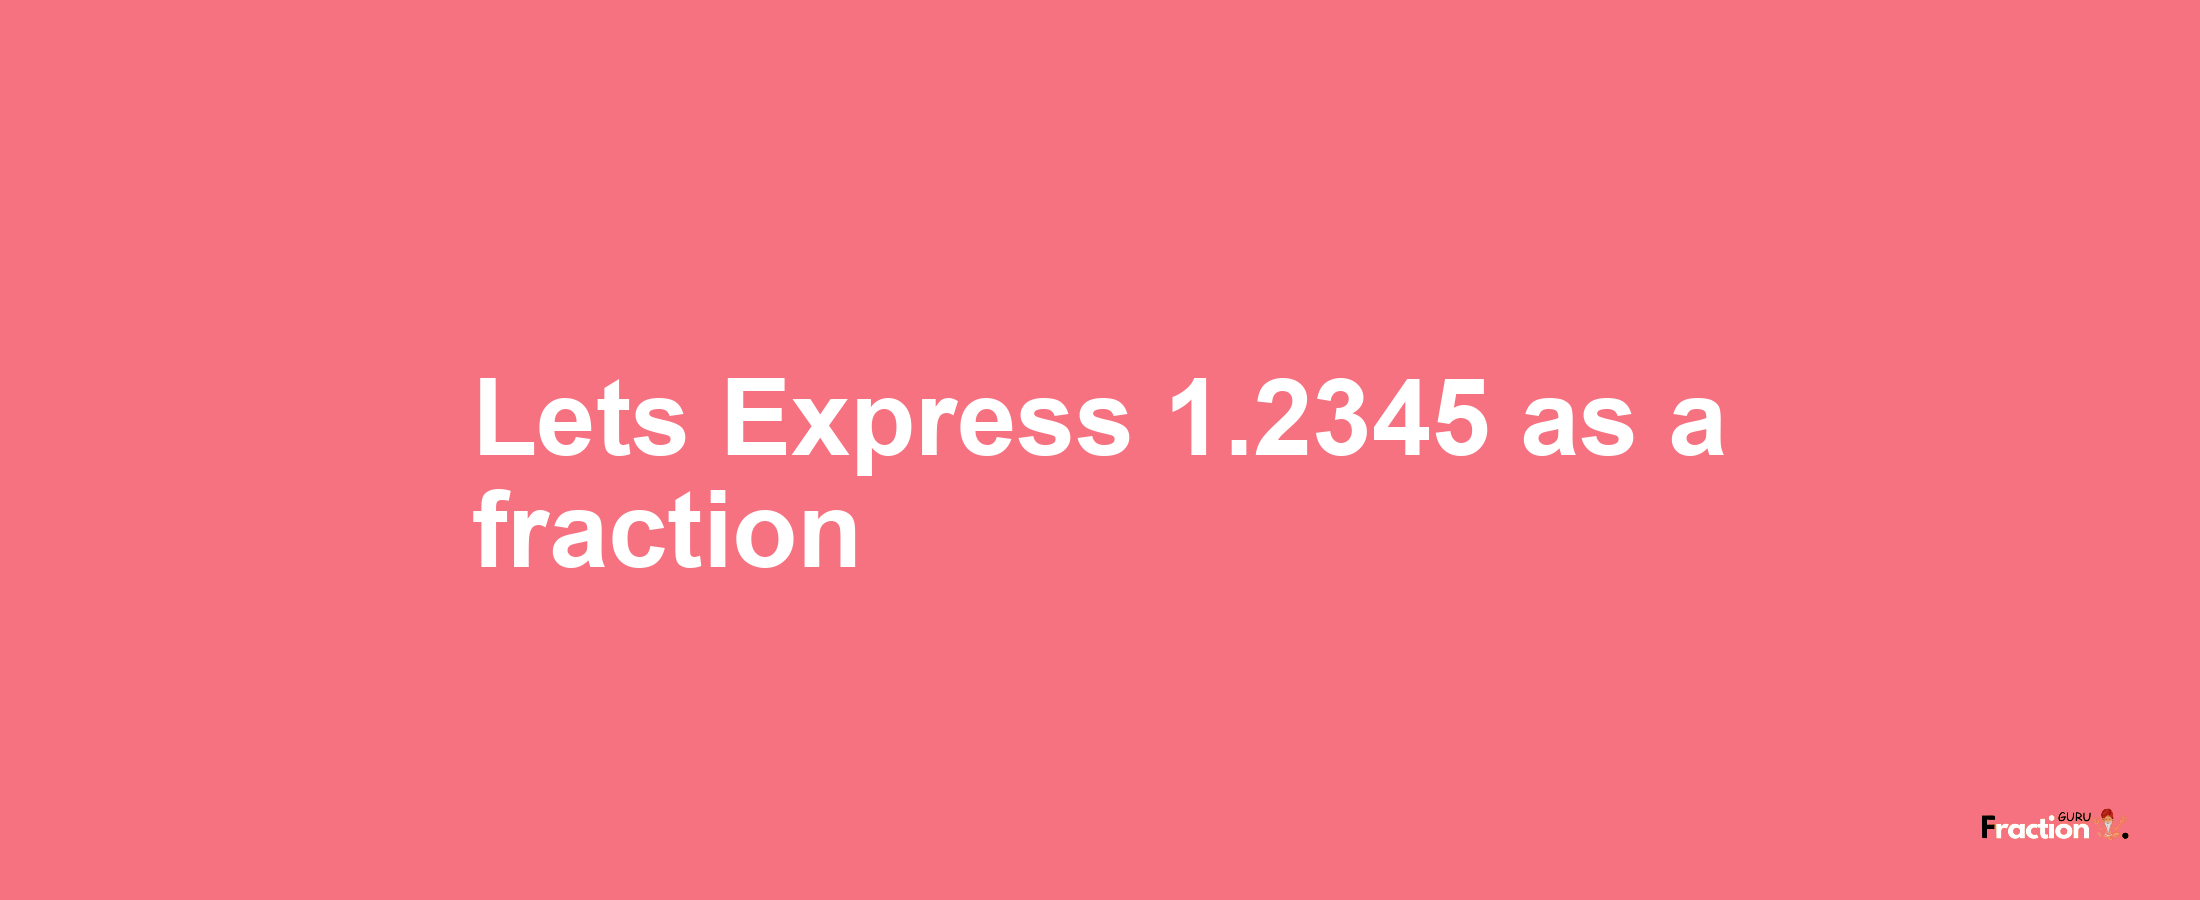 Lets Express 1.2345 as afraction